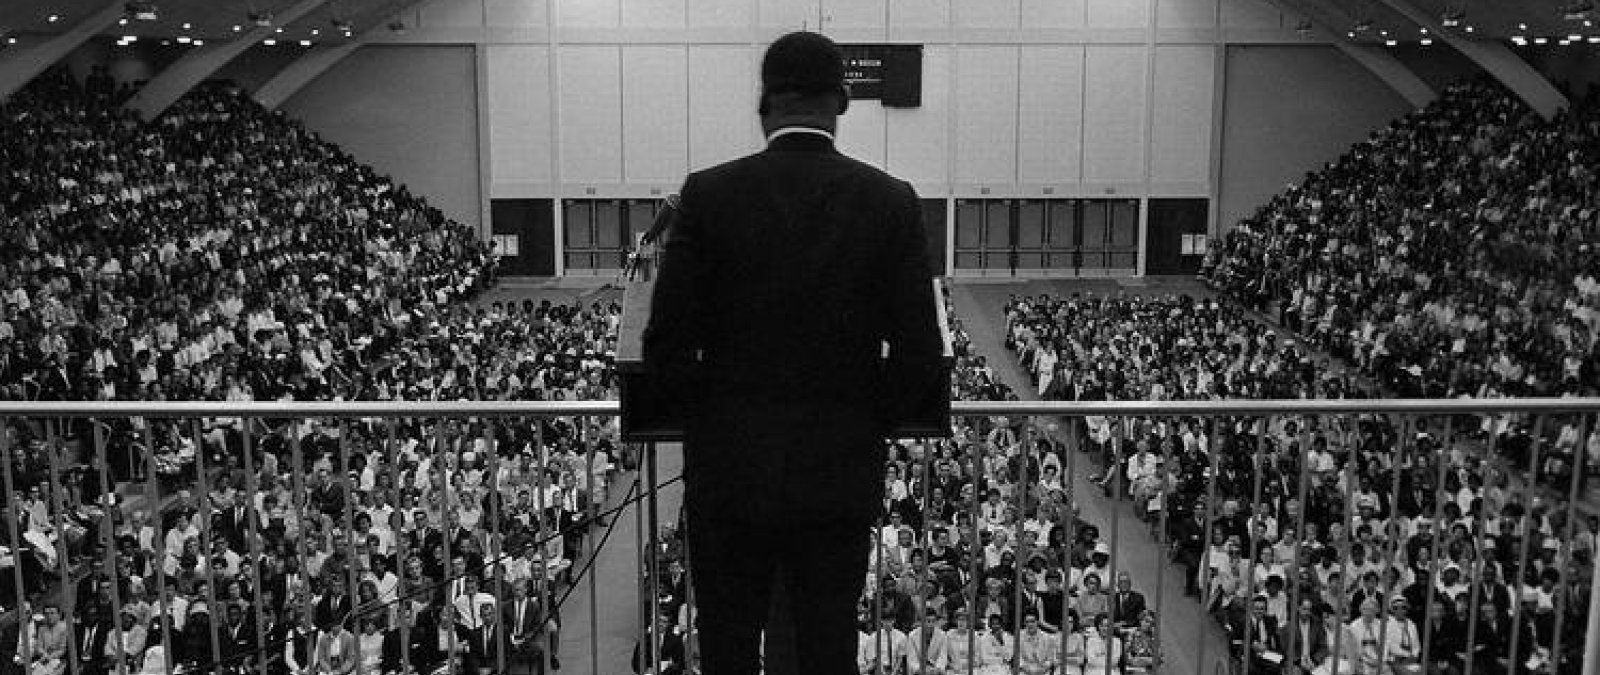 Martin Luther King Jr speaks to a large crowd gathered in Golden Gymnasium.